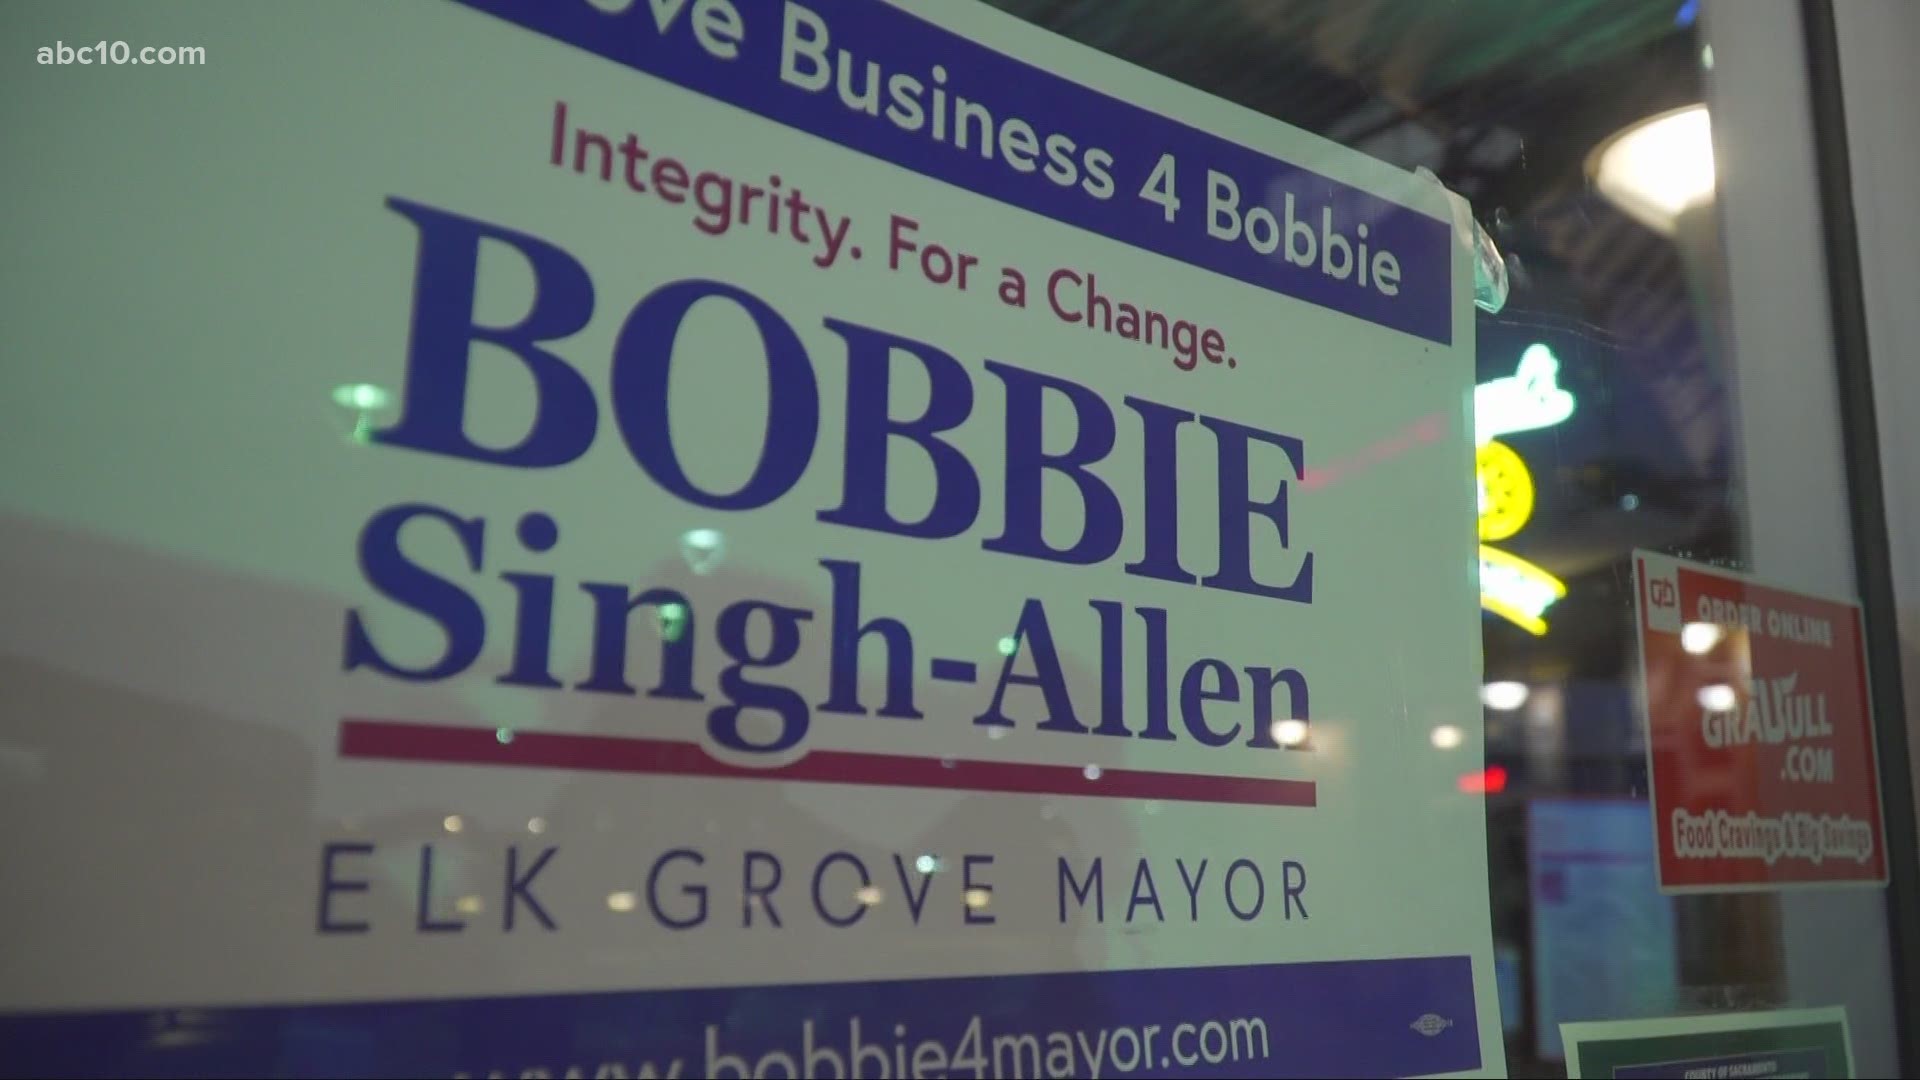 Bobbie Singh-Allen will be the next mayor of Elk Grove and the first directly elected Sikh woman mayor in the United States.